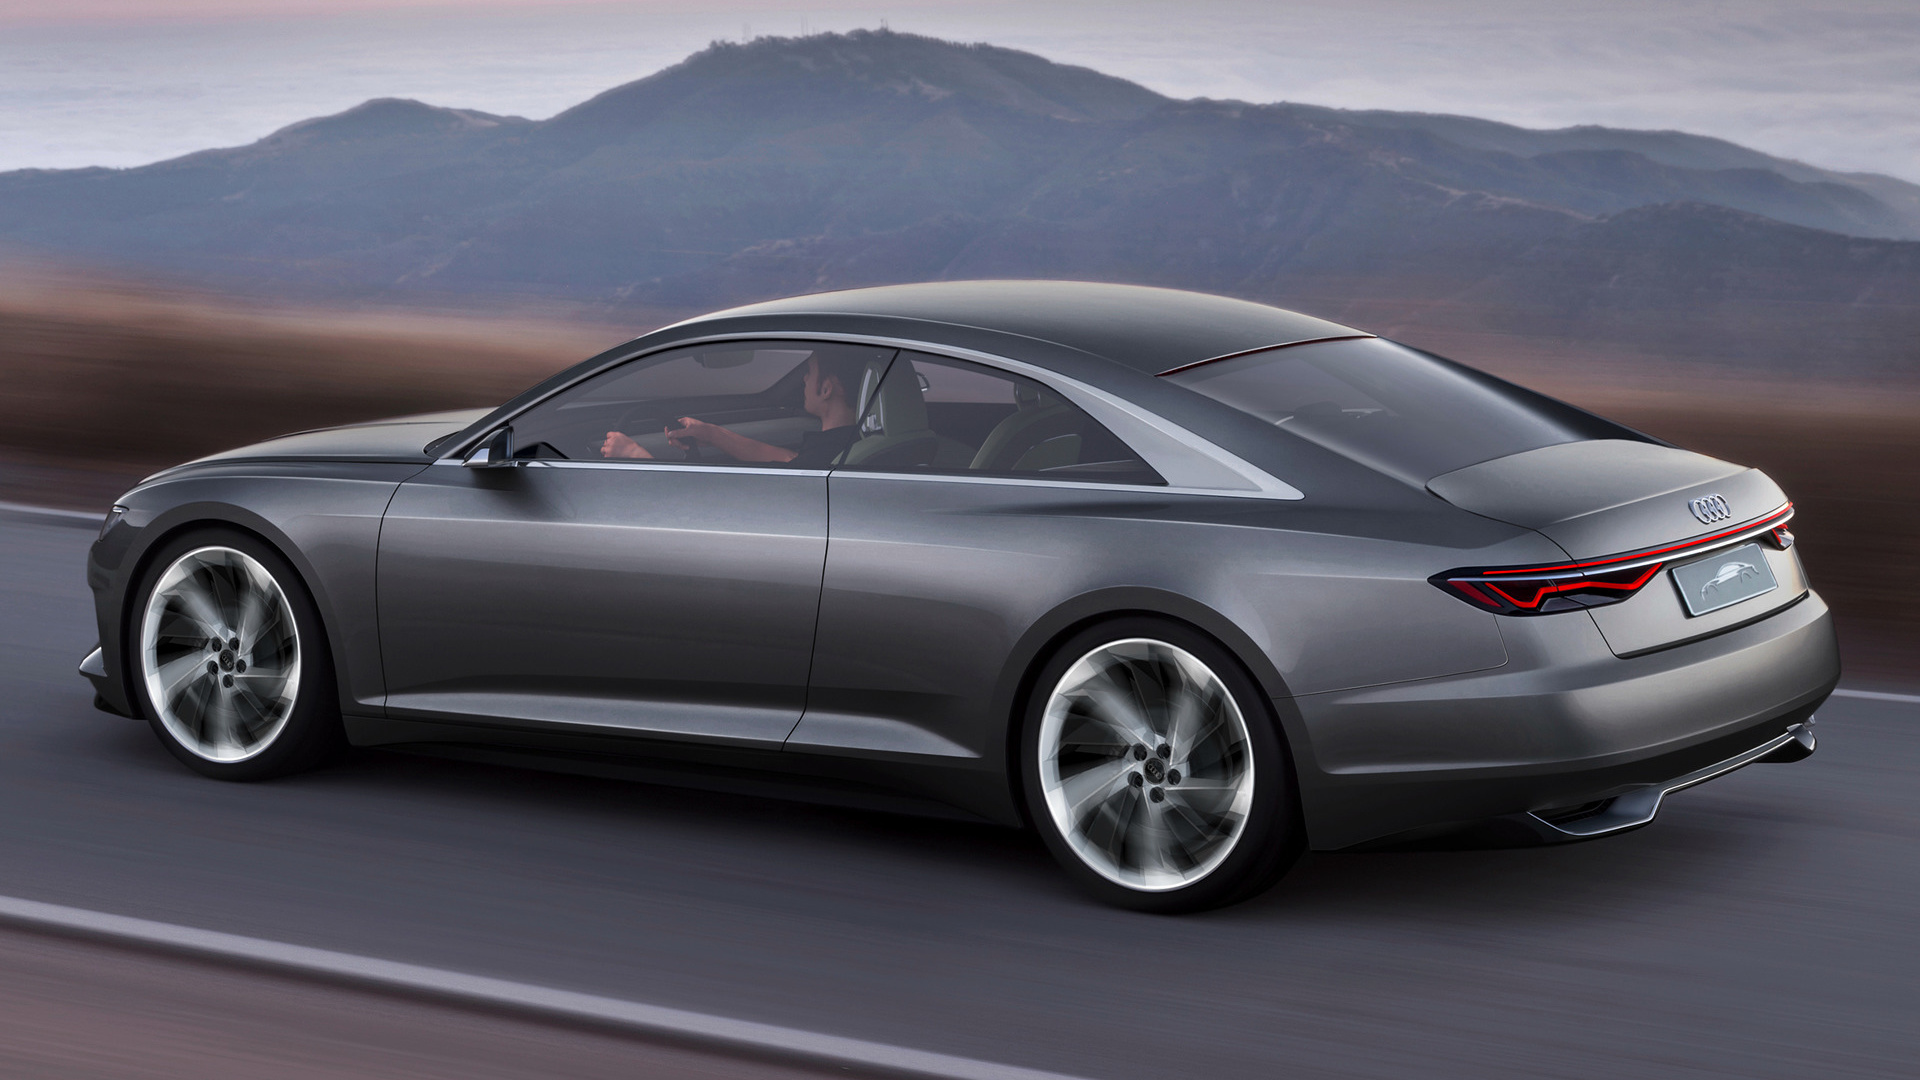 2015 Audi Prologue Piloted Driving Concept Wallpaper Collection.